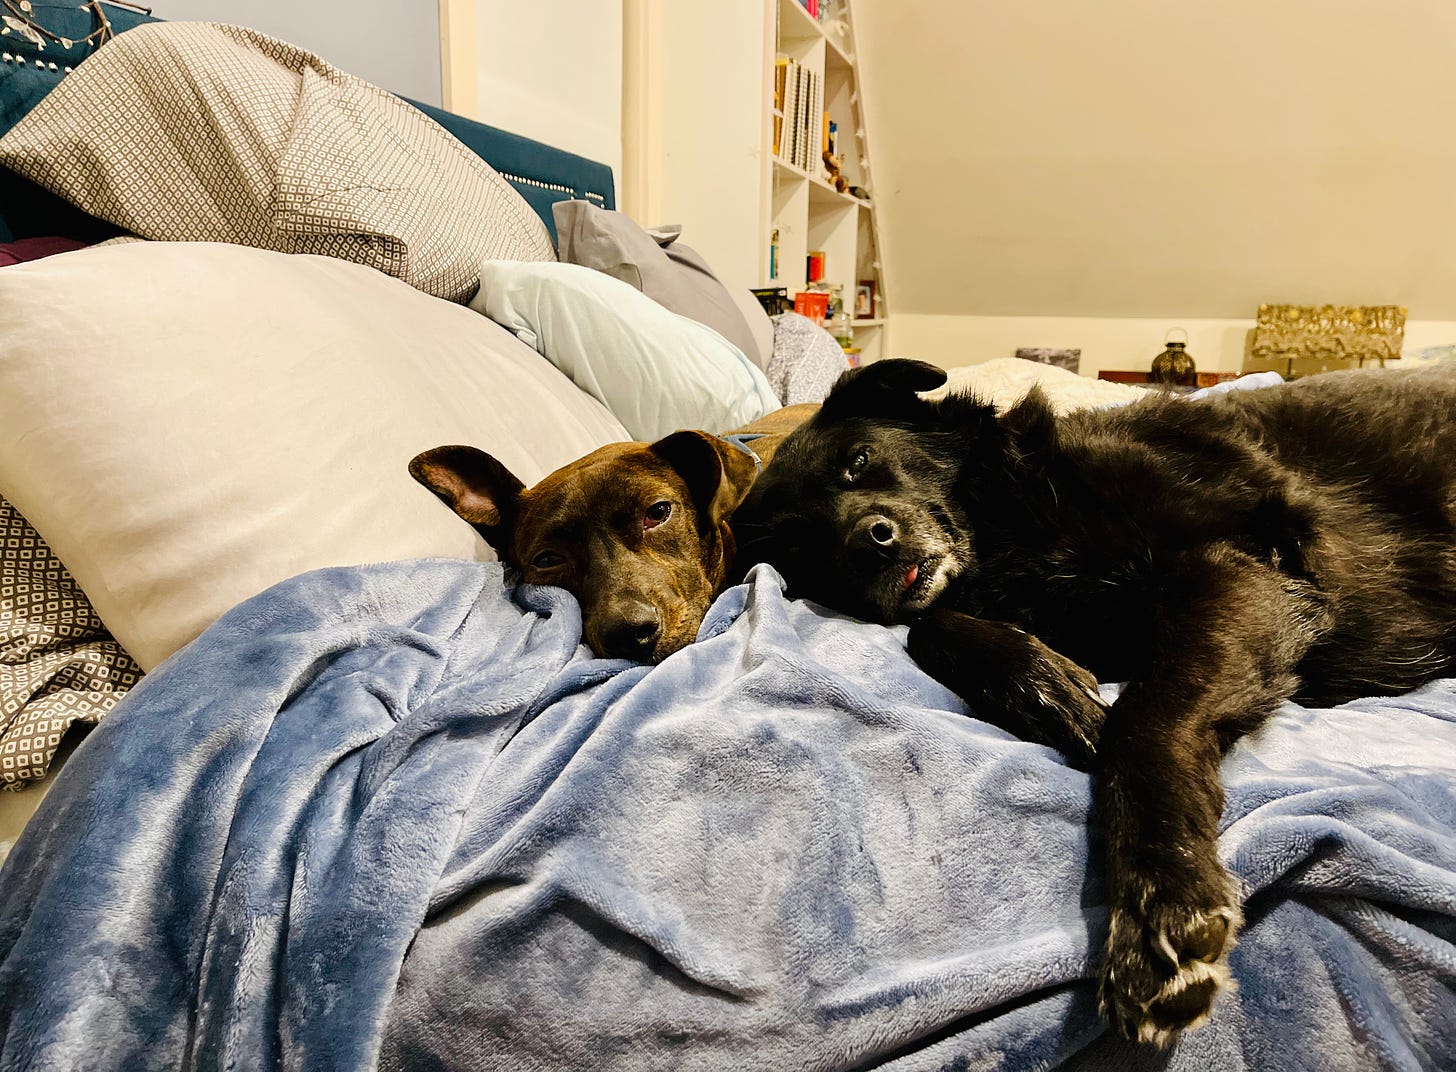 Two dogs flopped on a bed together cuddling